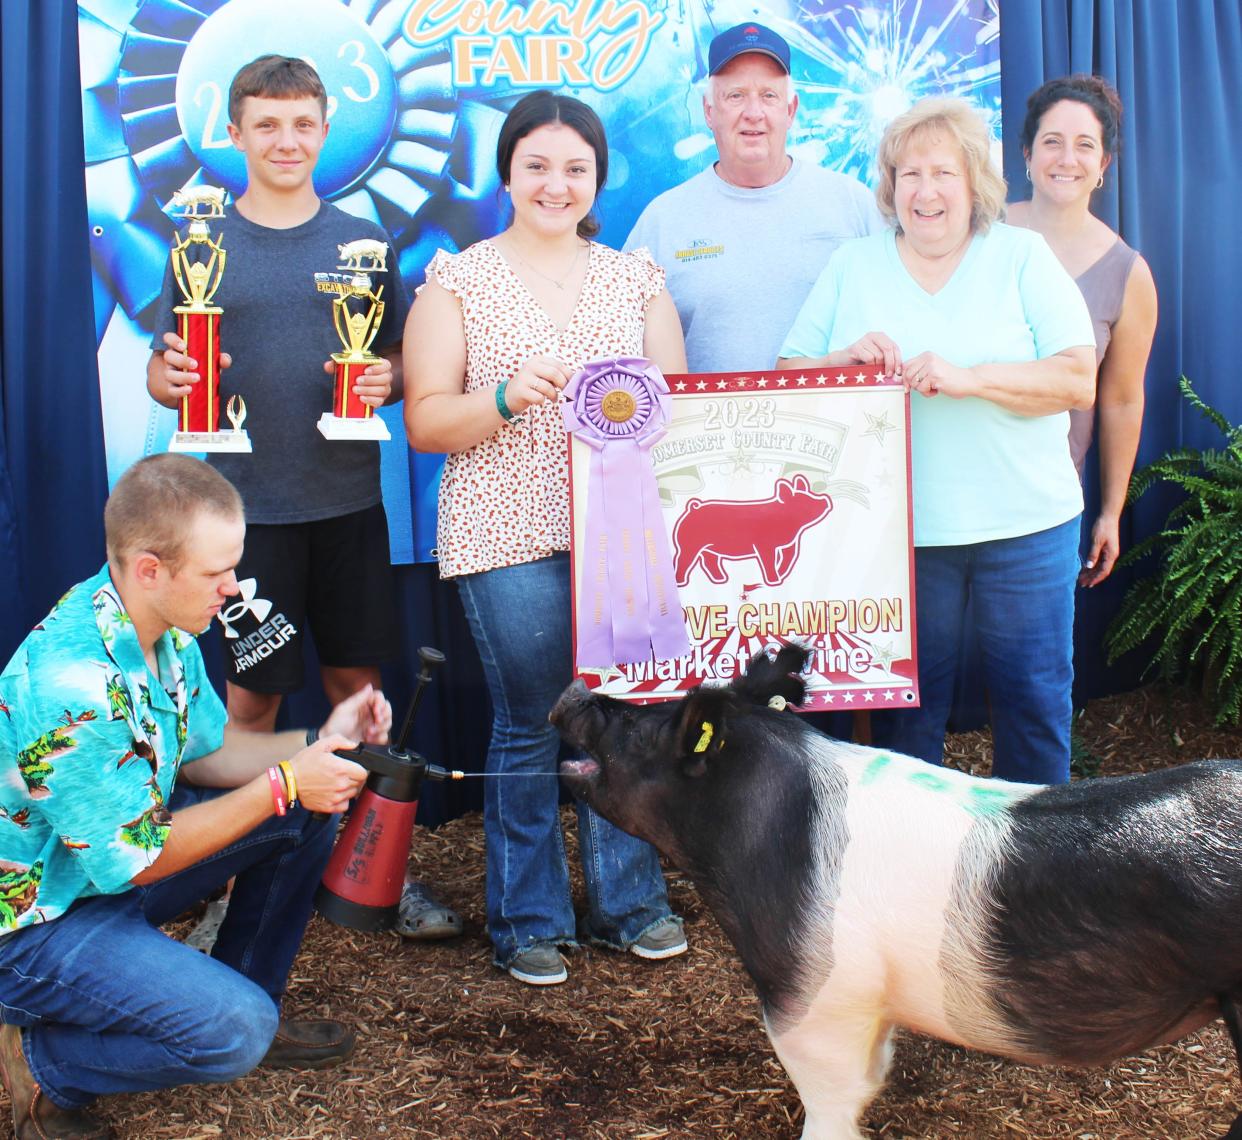 Lydia Sheeler of Somerset sold her reserve grand champion swine for $22 a pound to Krause Service LLC, represented here by Bill and Susan Krause of Somerset, during the junior livestock sale at the Somerset County Fair on Saturday. Also shown are from left: Lydia's brother, Sam Sheeler, and her mother, Julia Sheeler on far right, and Caleb Antram kneeling.